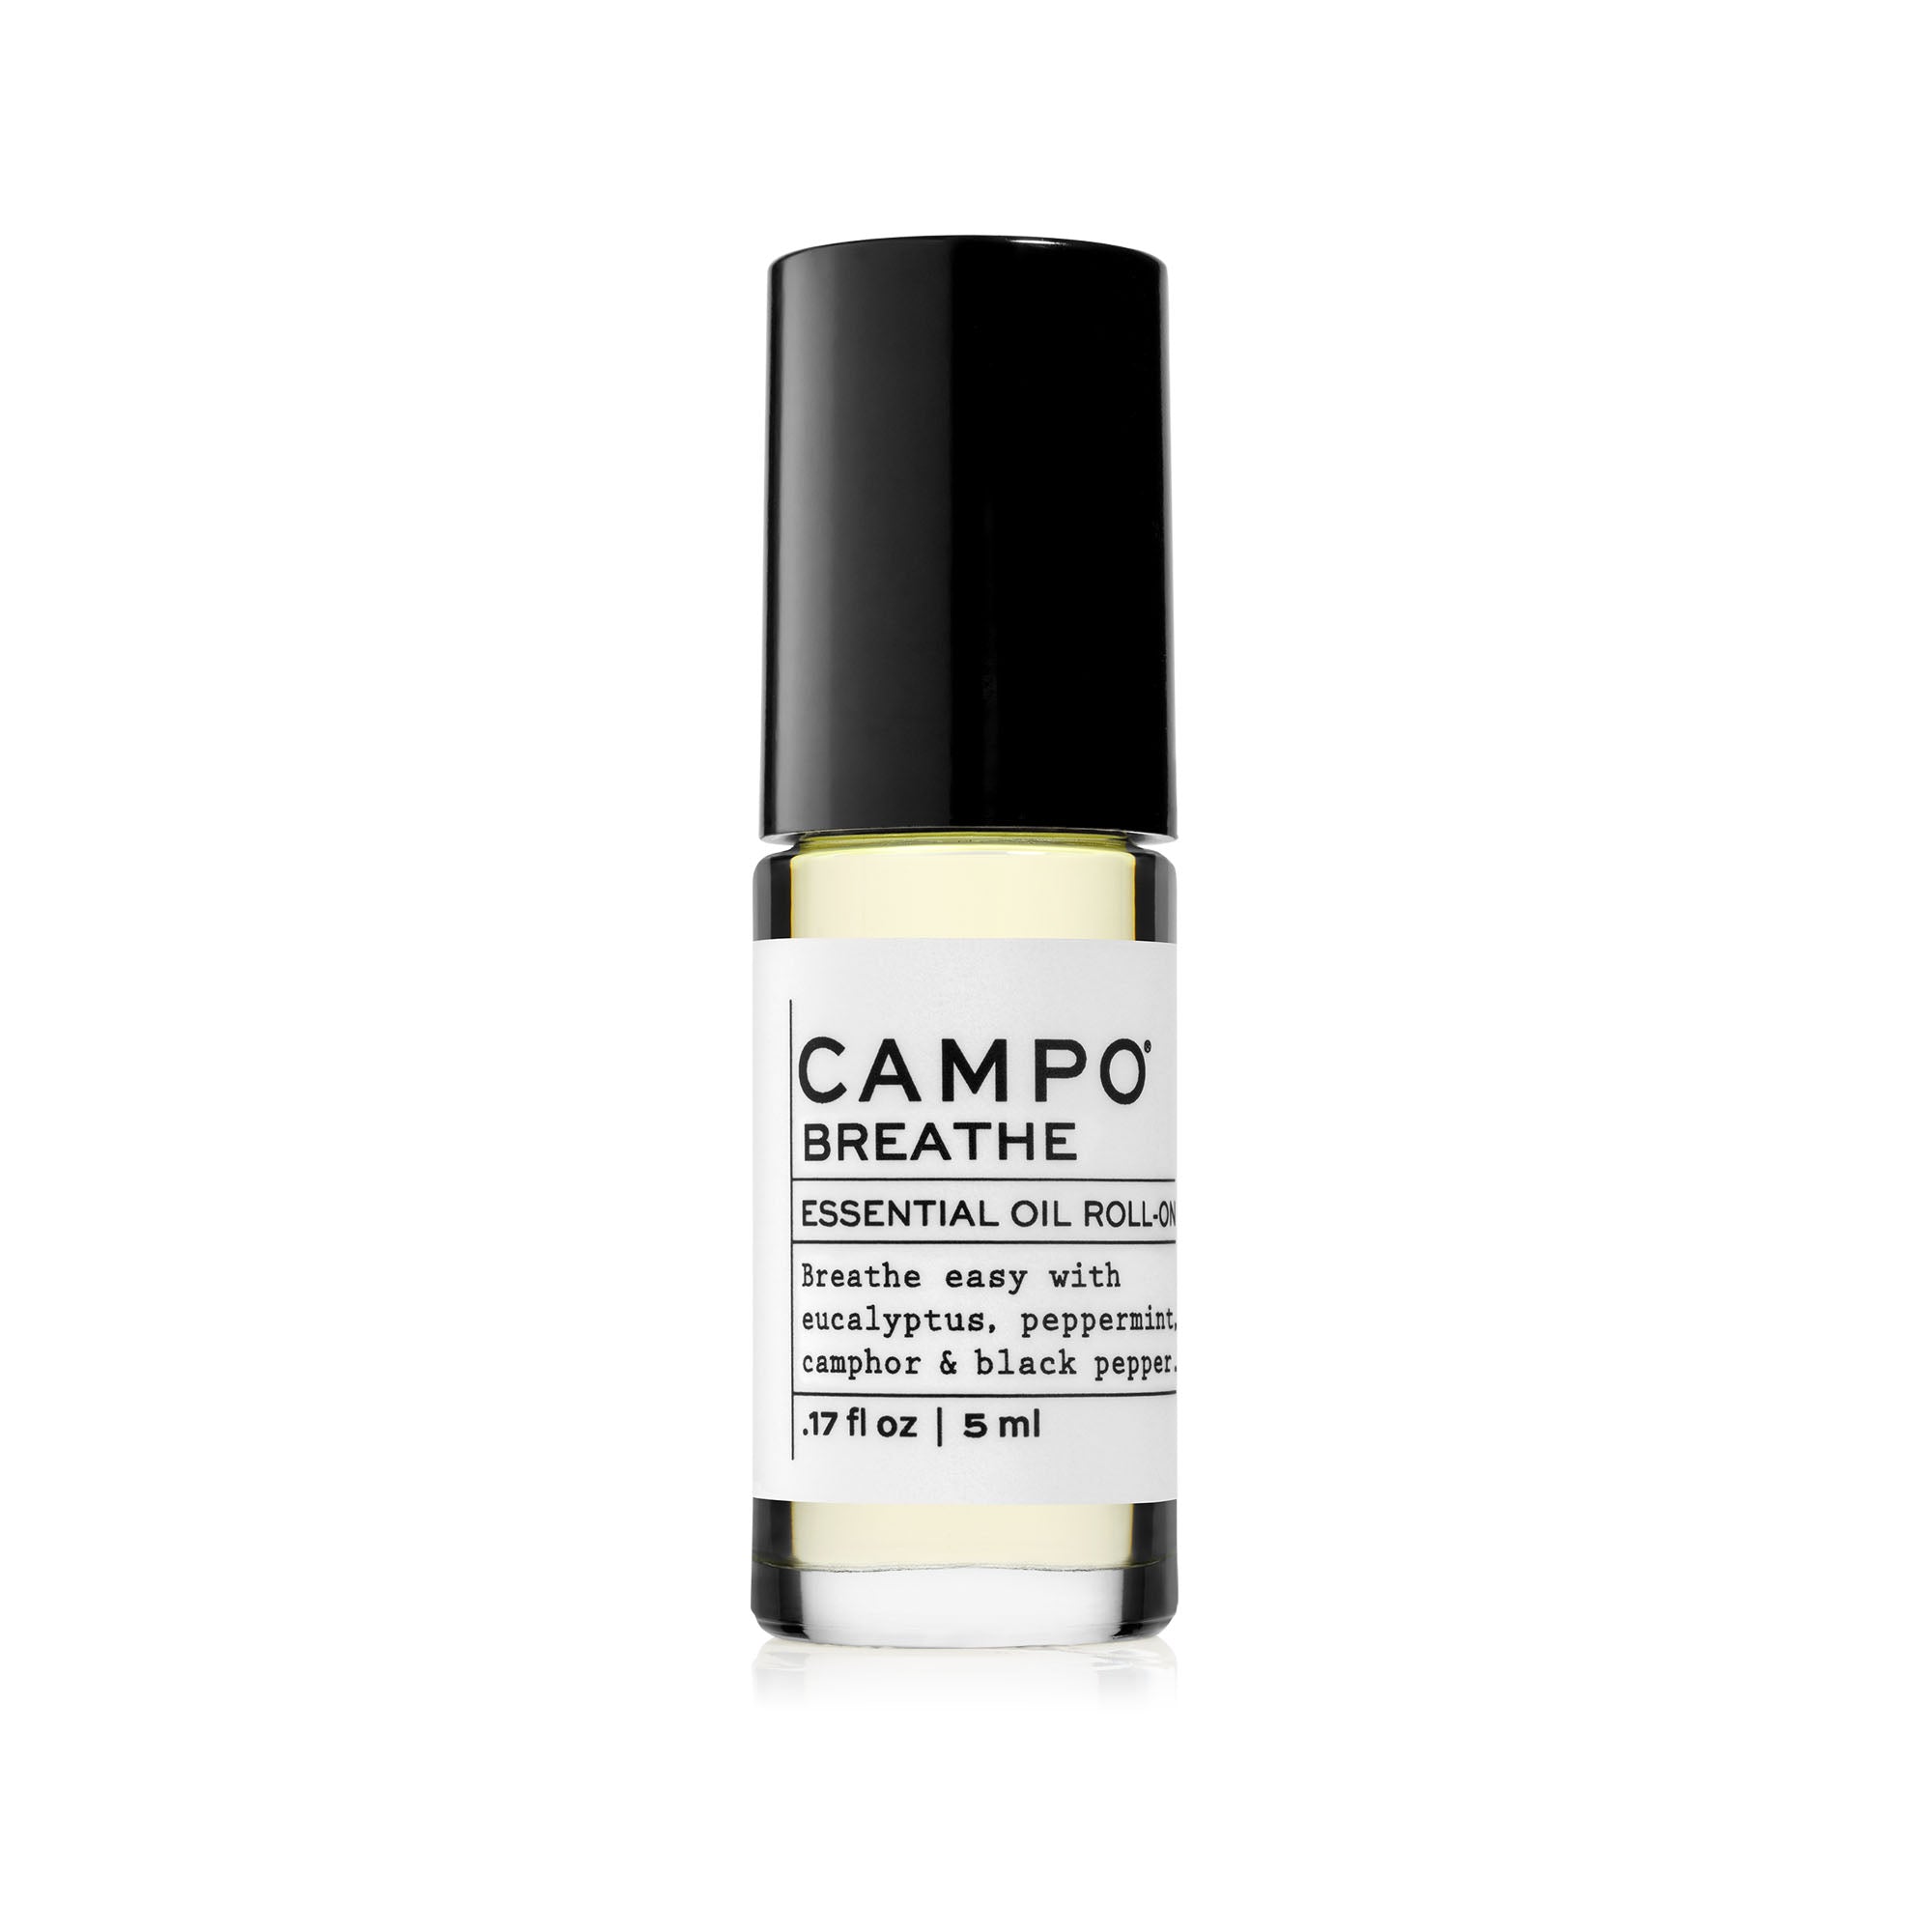 CAMPO Beauty 5 ml BREATHE Blend Essential Oil Roll-On. Breathe easy with this essential oil blend of eucalyptus, peppermint, camphor & black pepper. Blended with 100% natural beauty carrier oils. Jet set and ready to roll. 